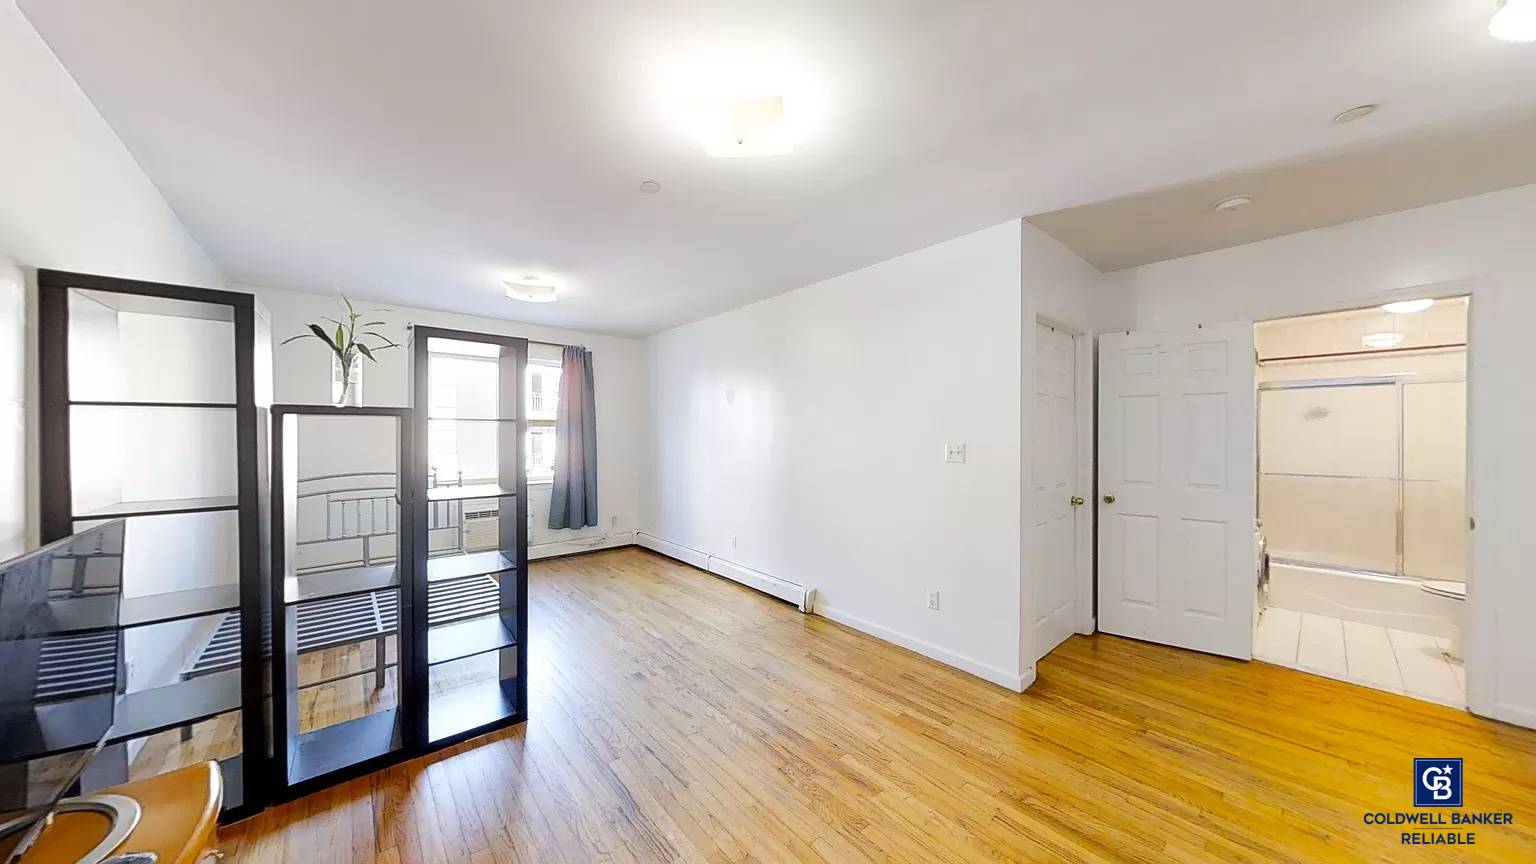 This one of a kind, condominium located in Williamsburg was built in 2005.